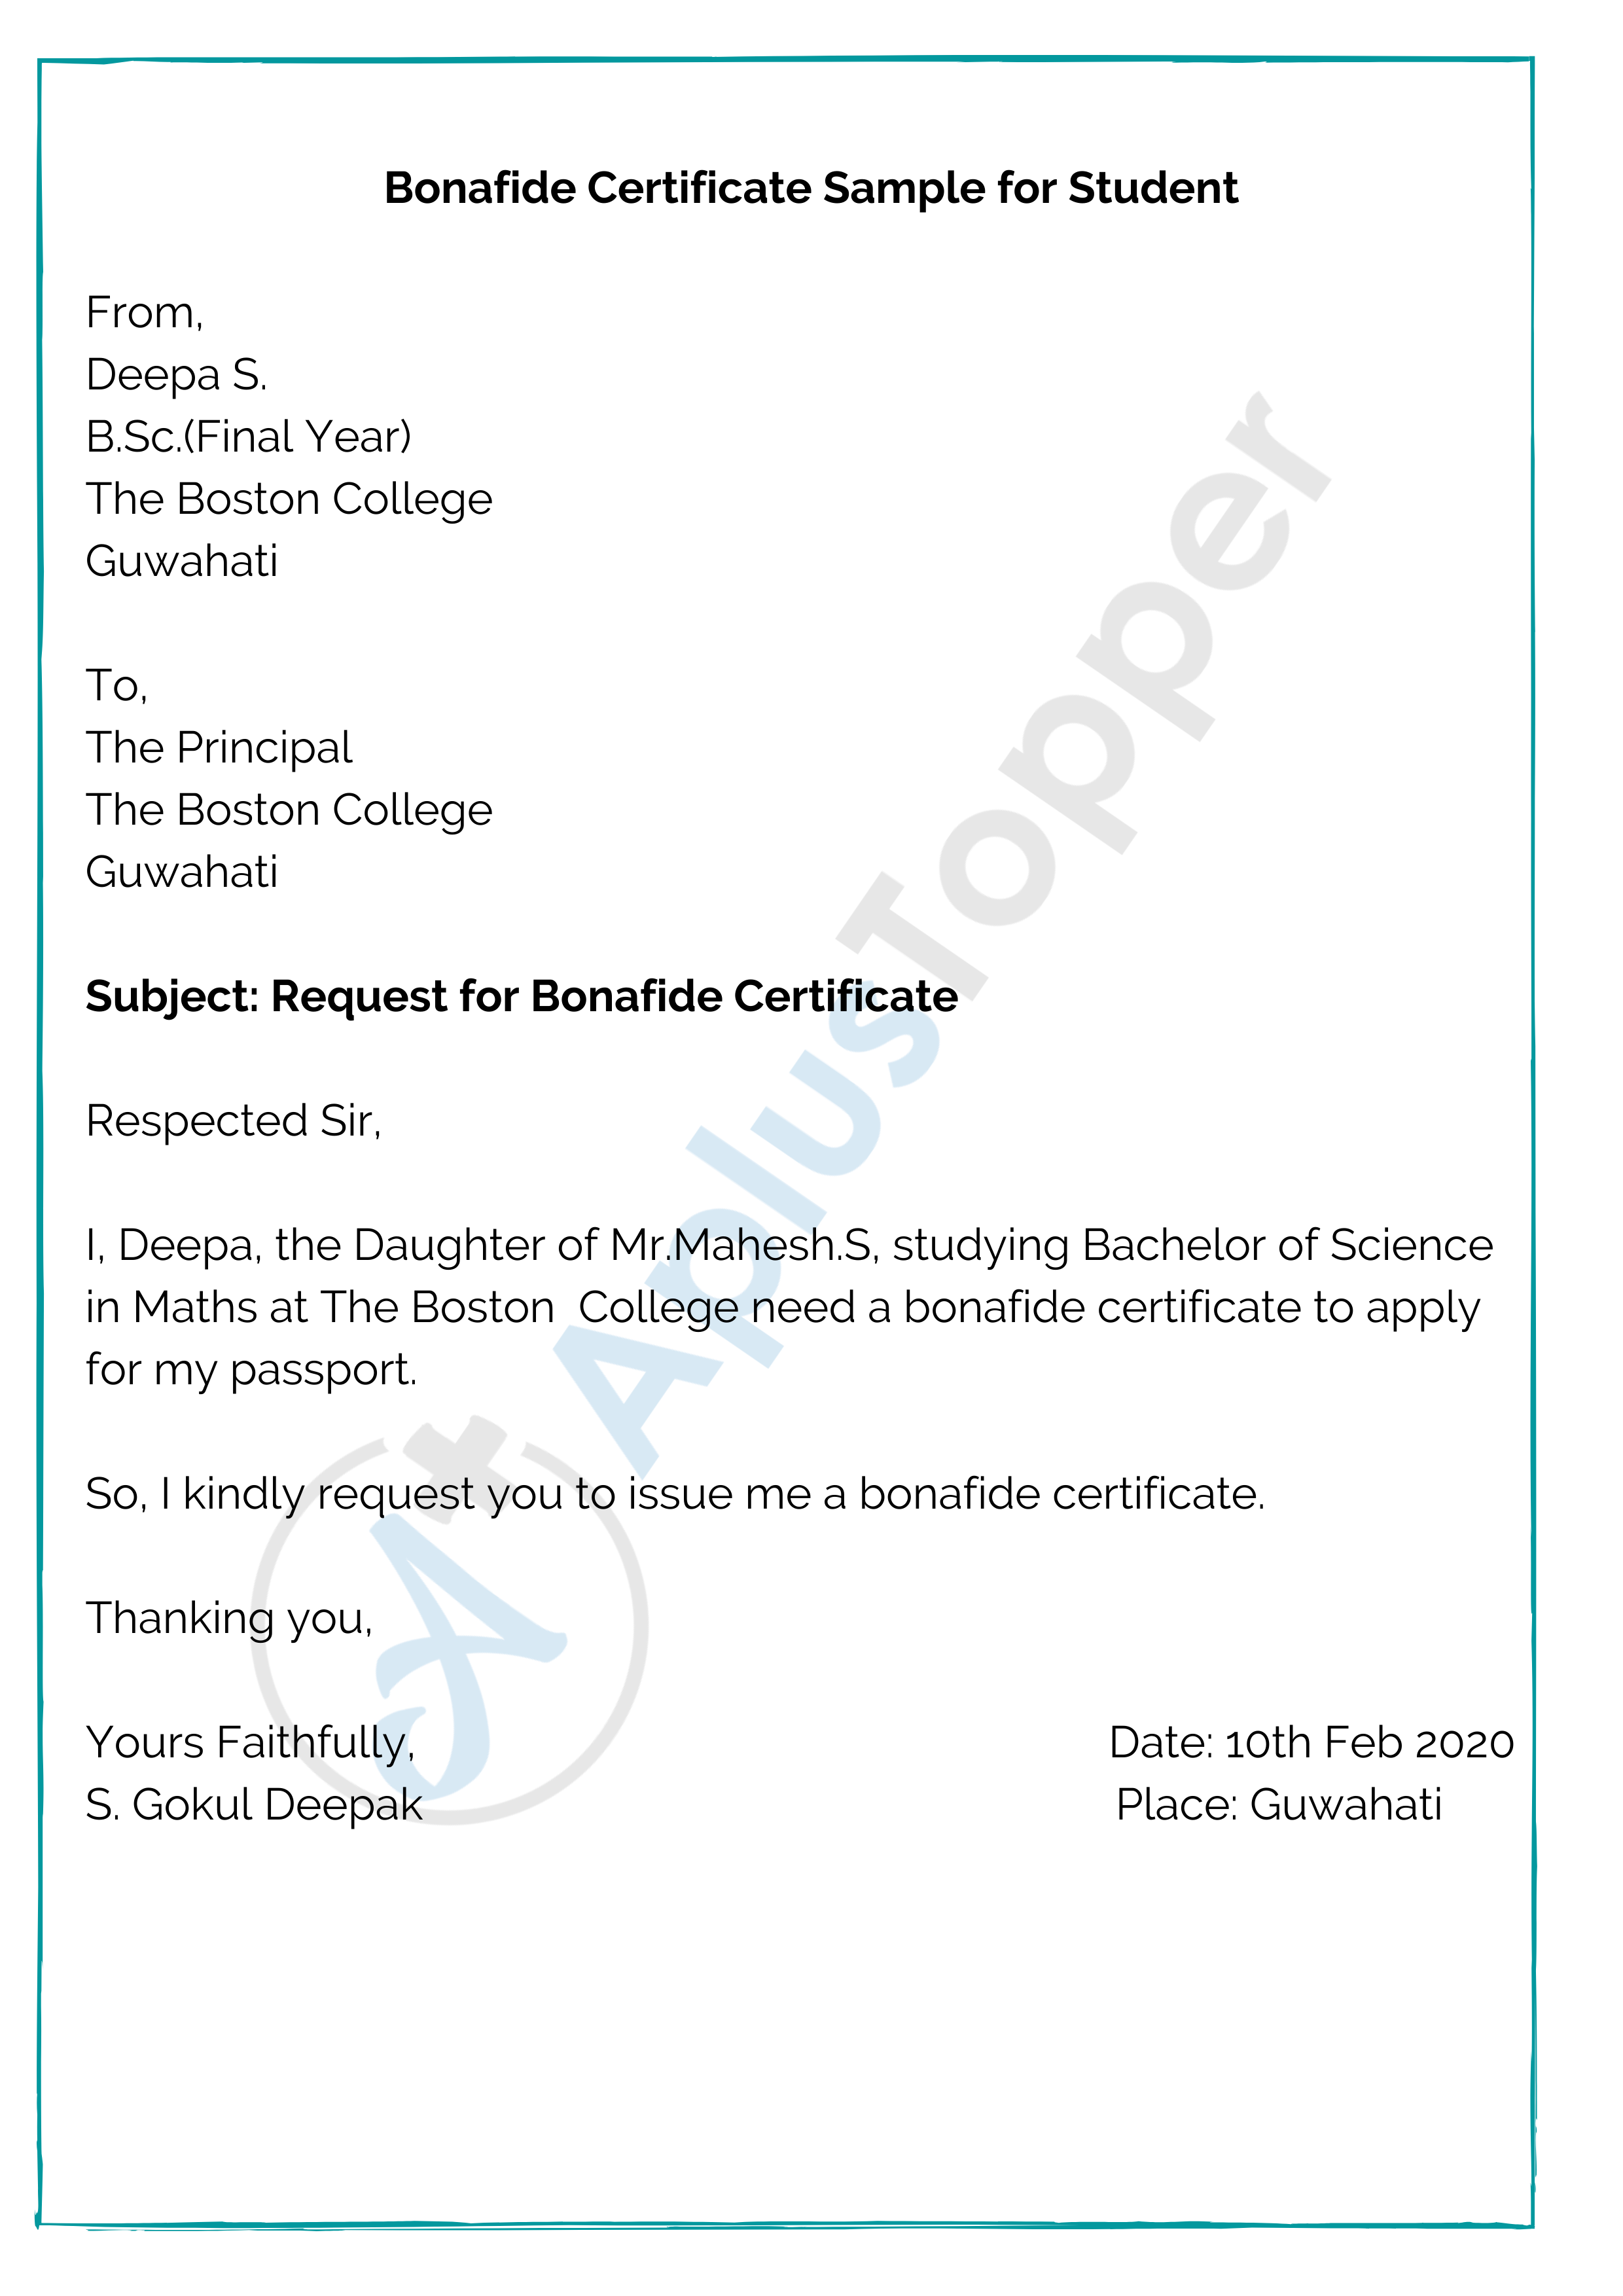 how to write application letter in english for bonafide certificate